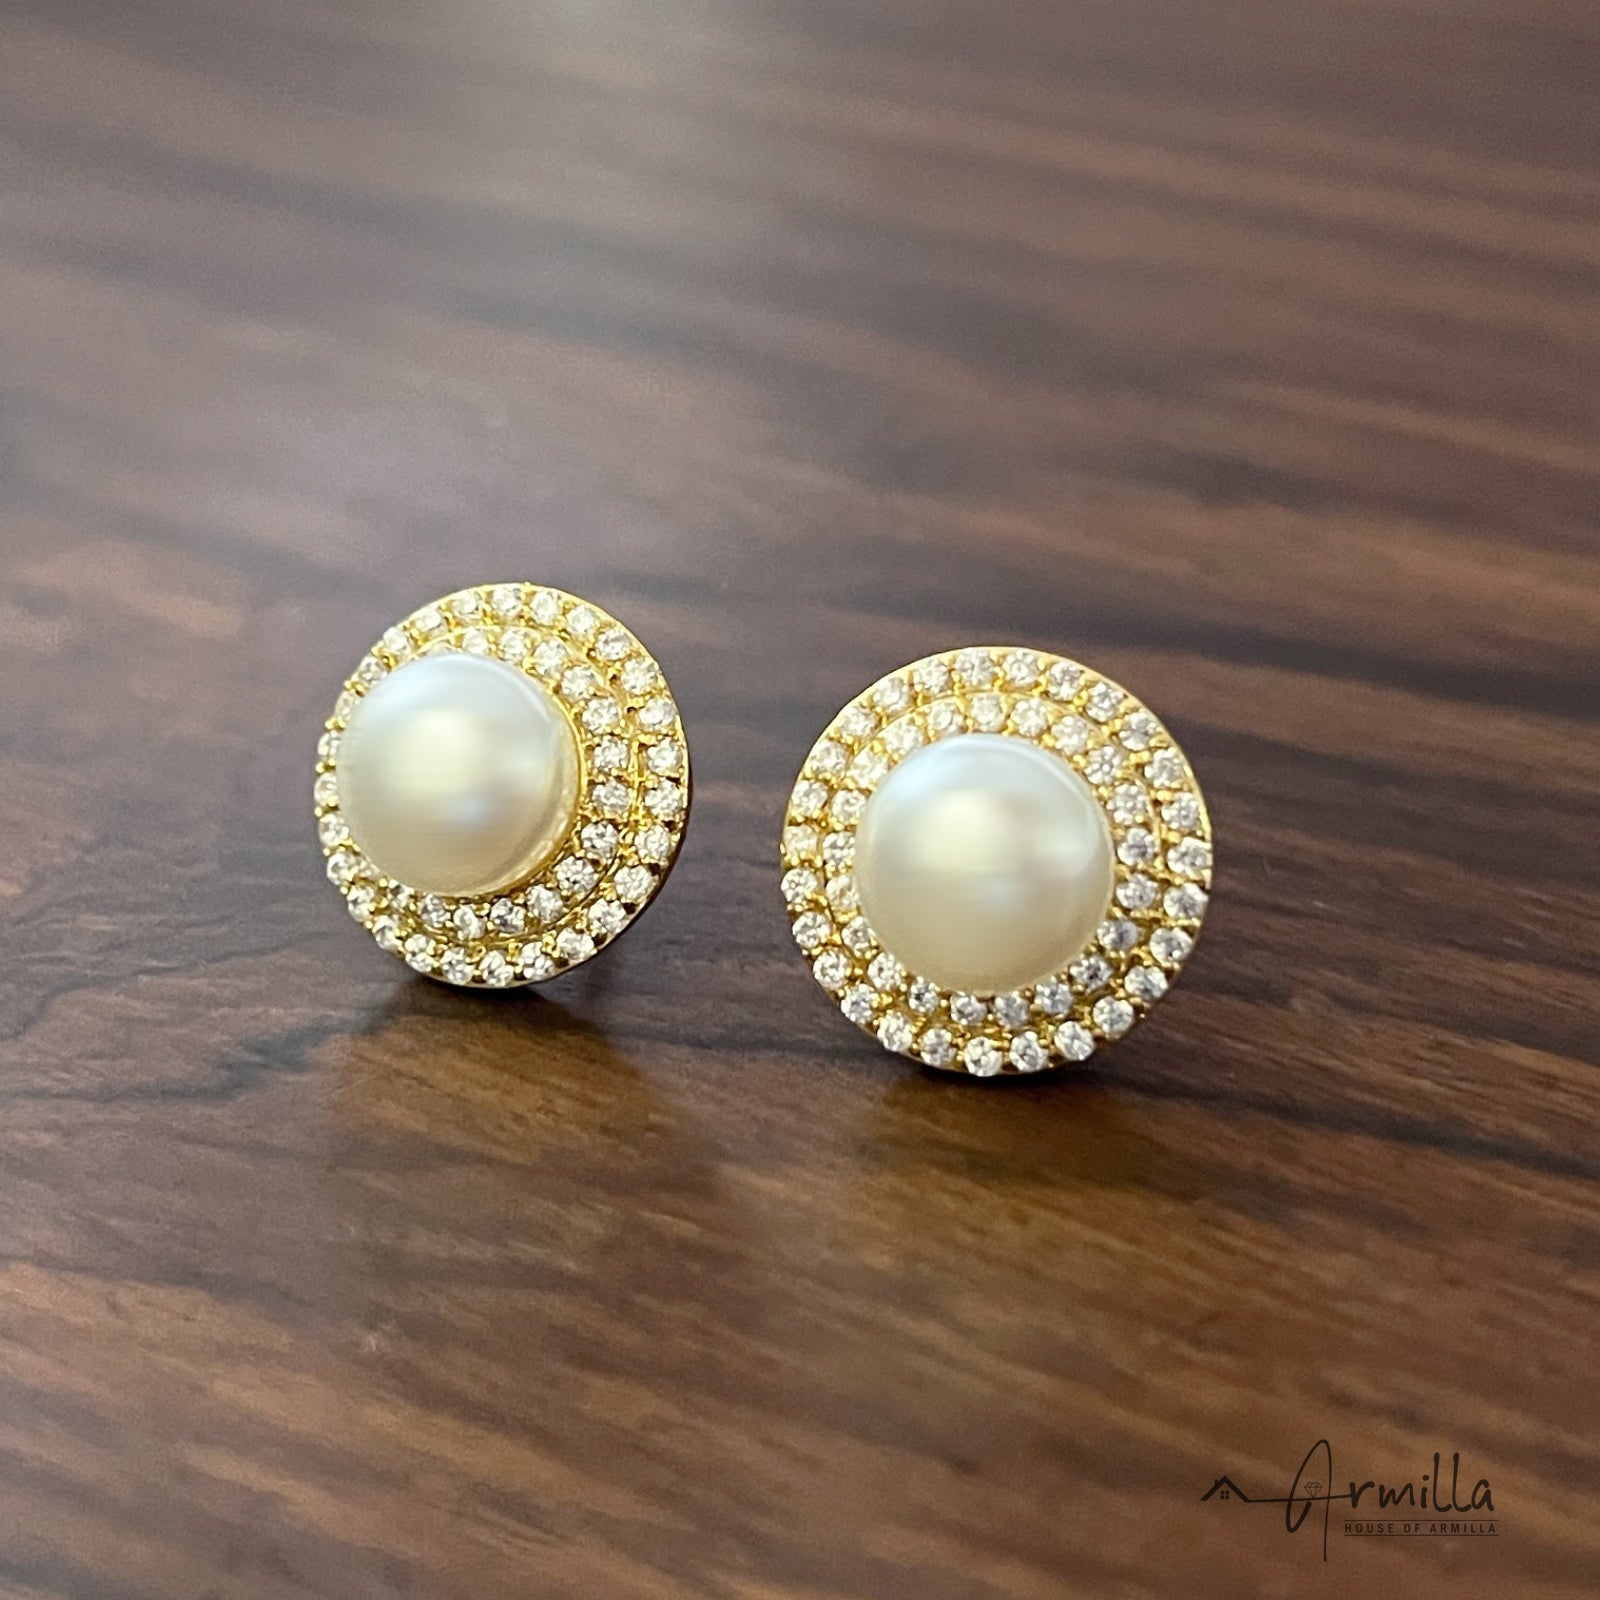 Very Rare Large 15.5-16mm White, Round and Clean South Sea Pearl Earri – MM  Fine Jewelry and Gems Inc.